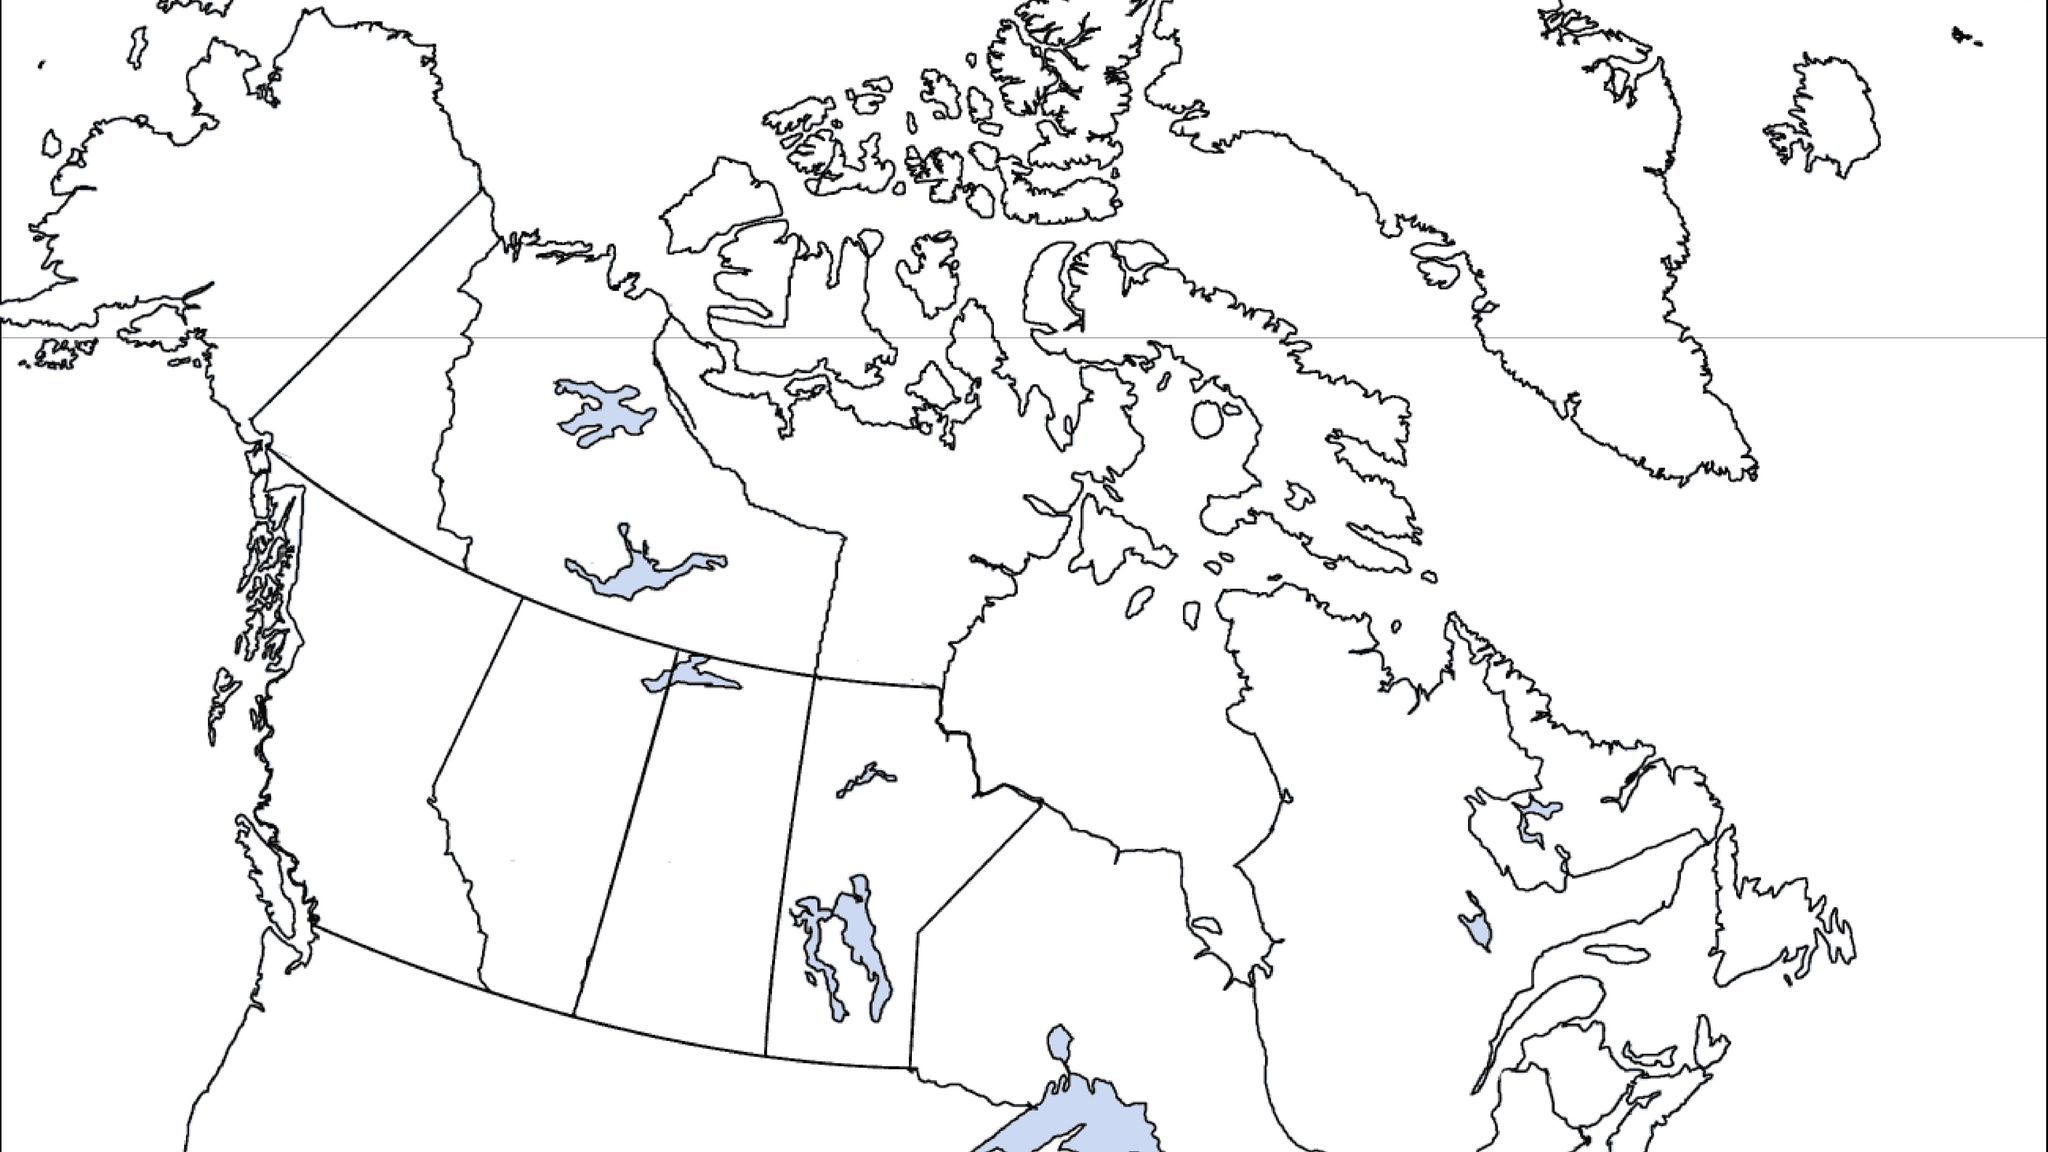 Just how big is Canada?